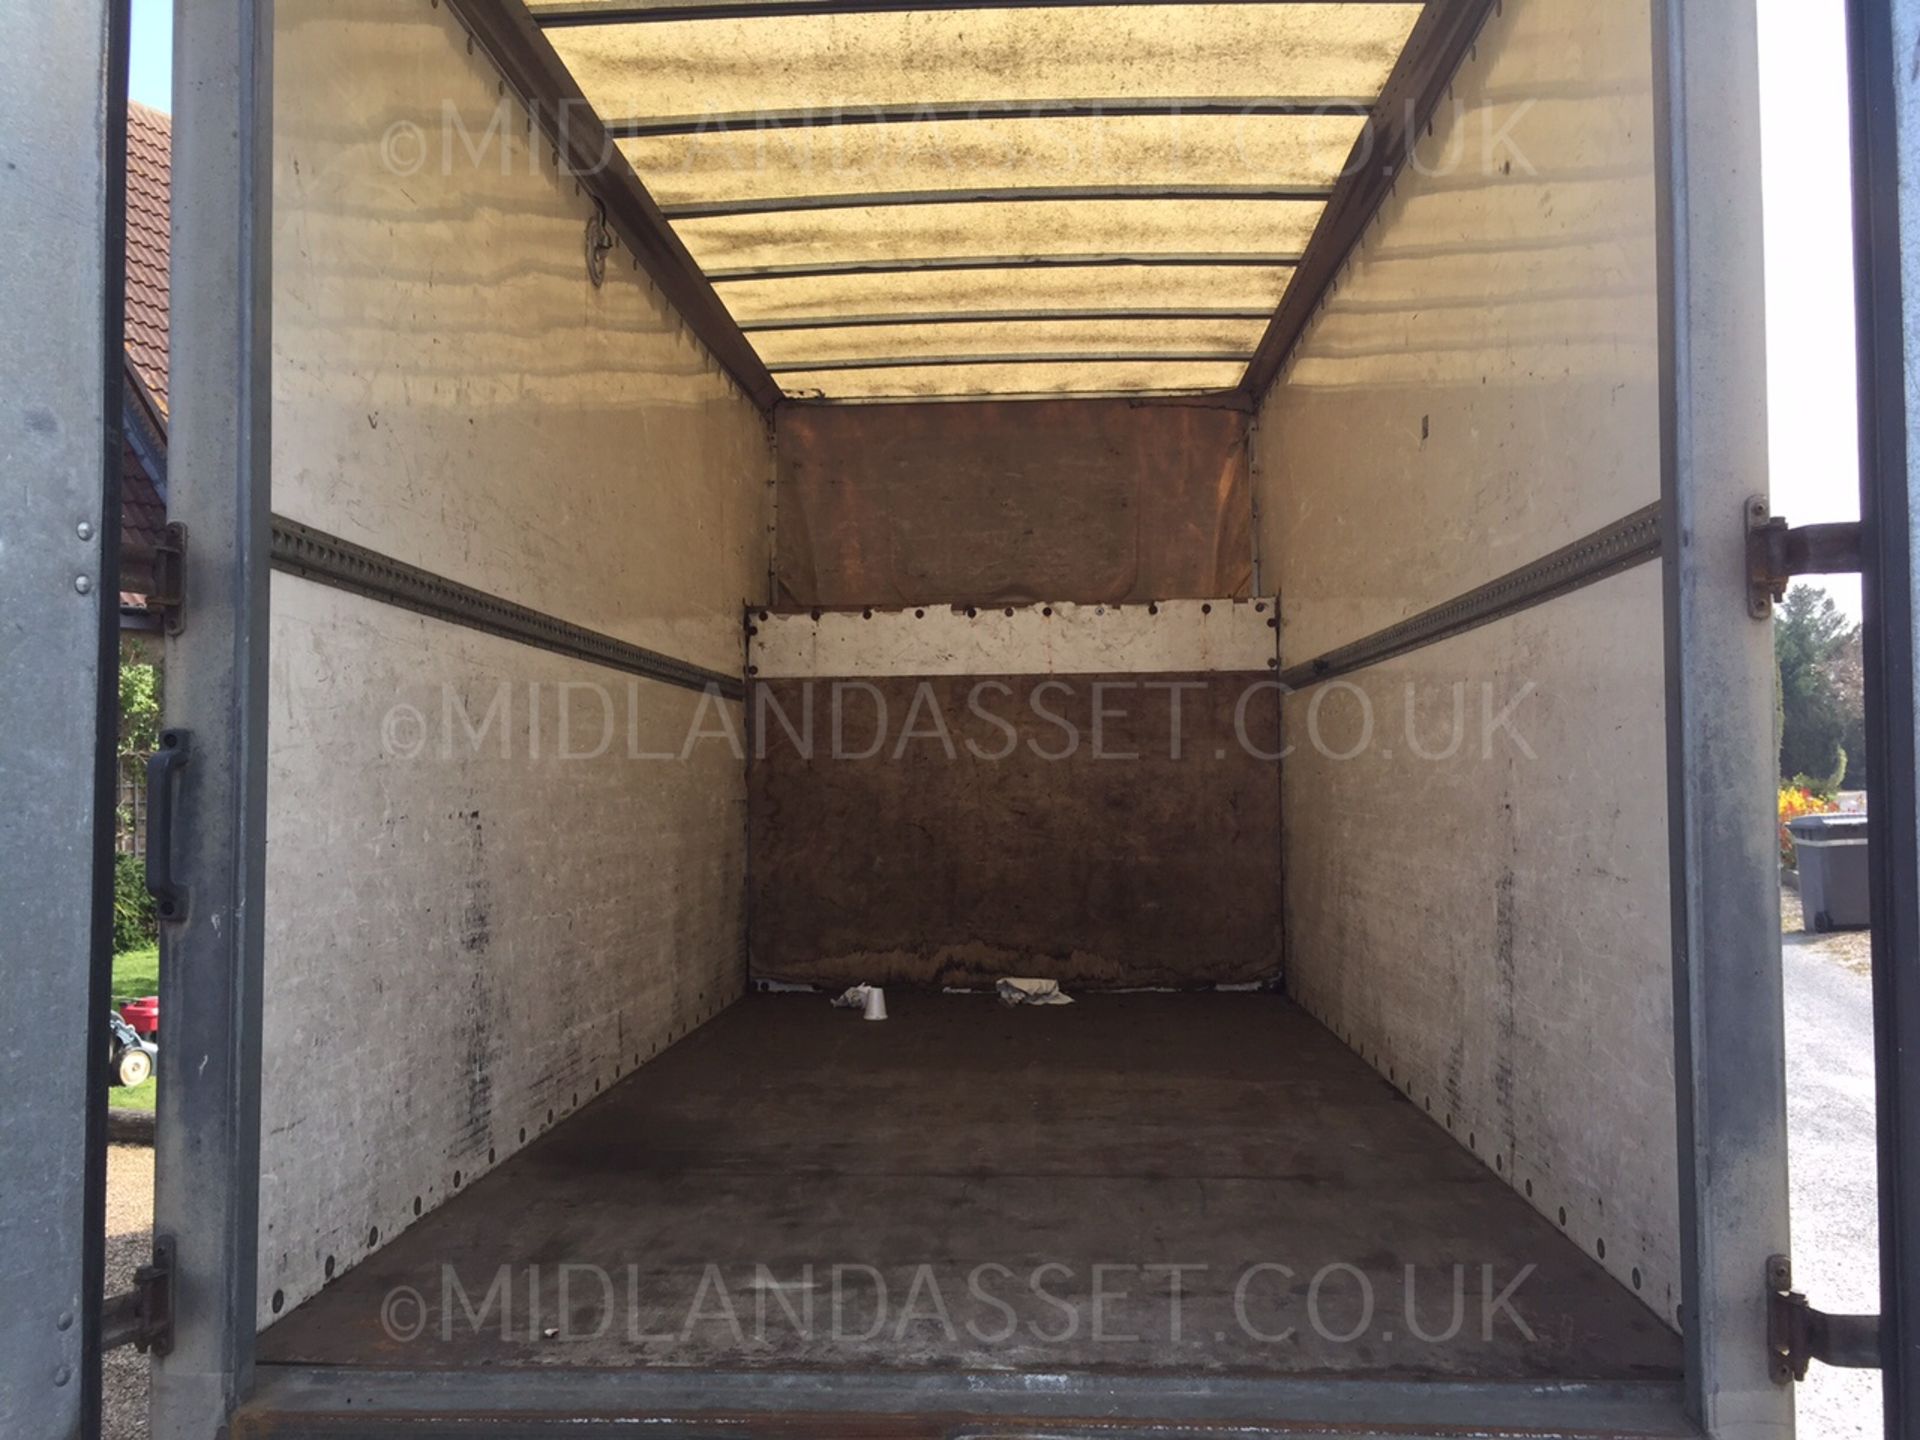 2005/05 REG IVECO DAILY 35C12 LUTON BODY TWIN REAR AXLE COMPANY DIRECT *NO VAT* - Image 8 of 10